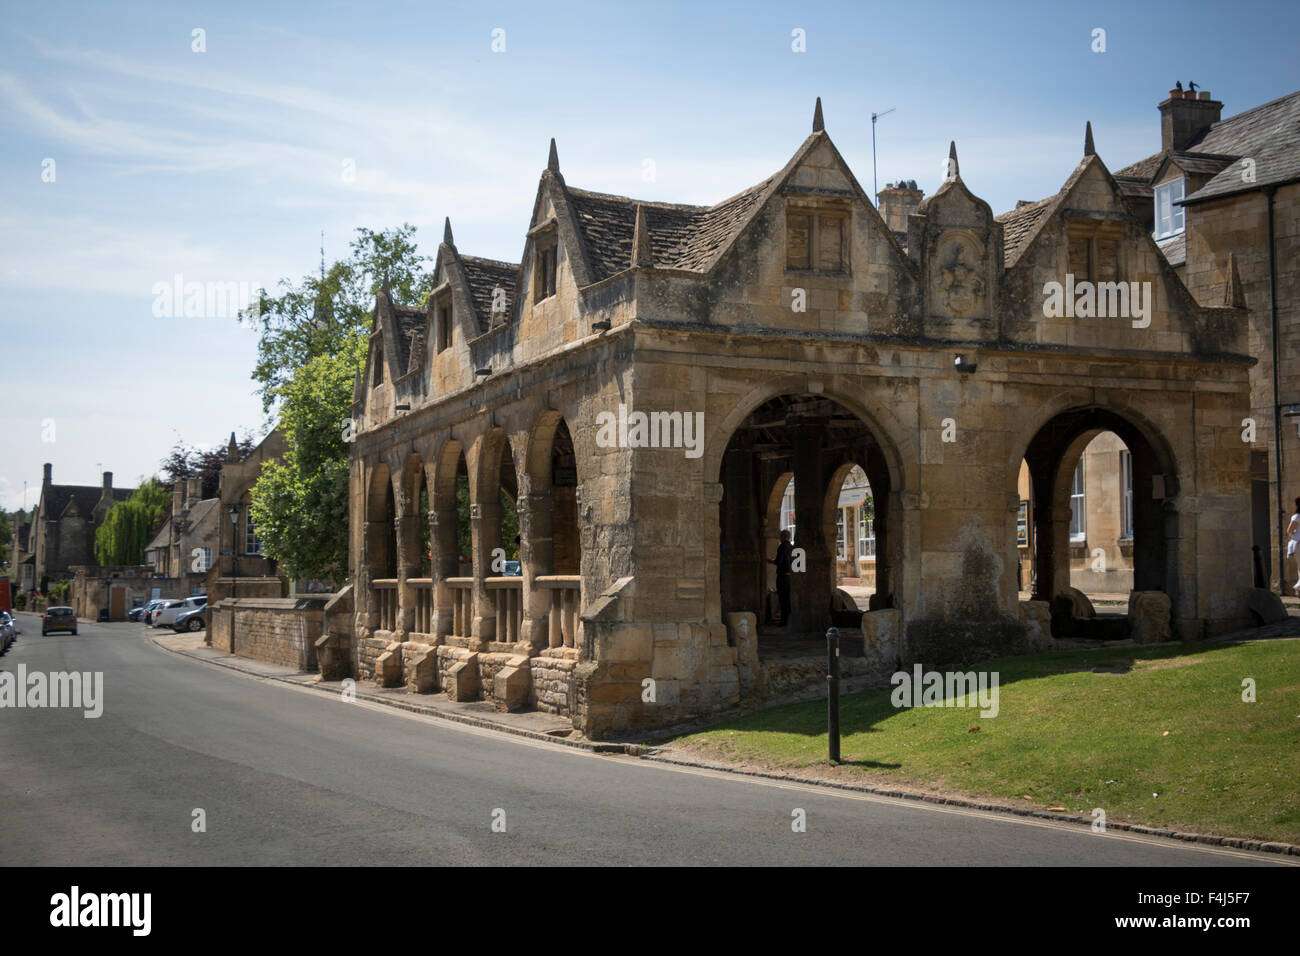 Market Hall dating from 1627, Chipping Campden, Gloucestershire, Cotswolds, England, United Kingdom, Europe Stock Photo